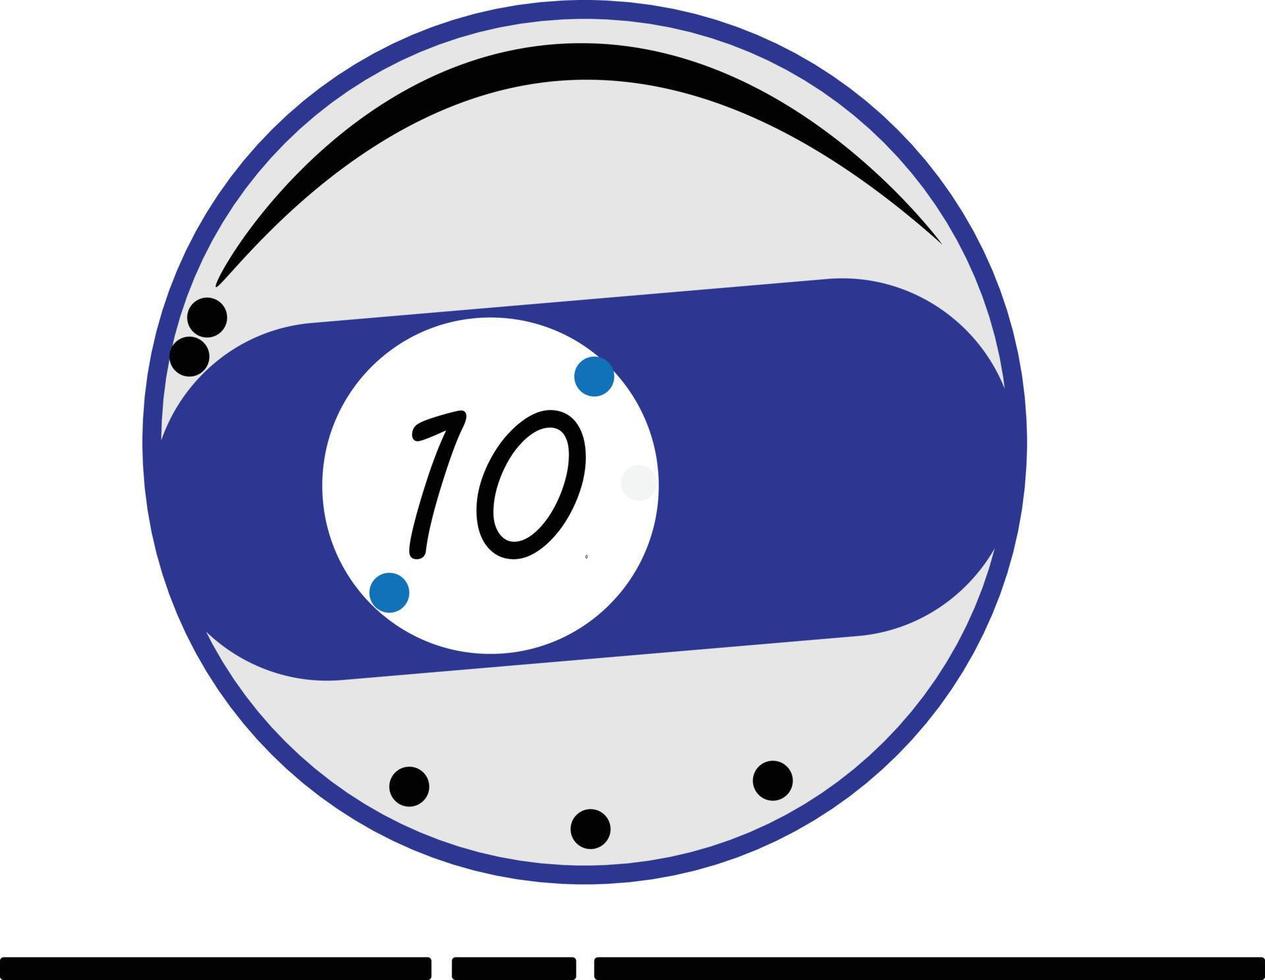 Vector of billiard ball series, vector of the number ten billiard ball. Great for icons, symbols and signs for pool players